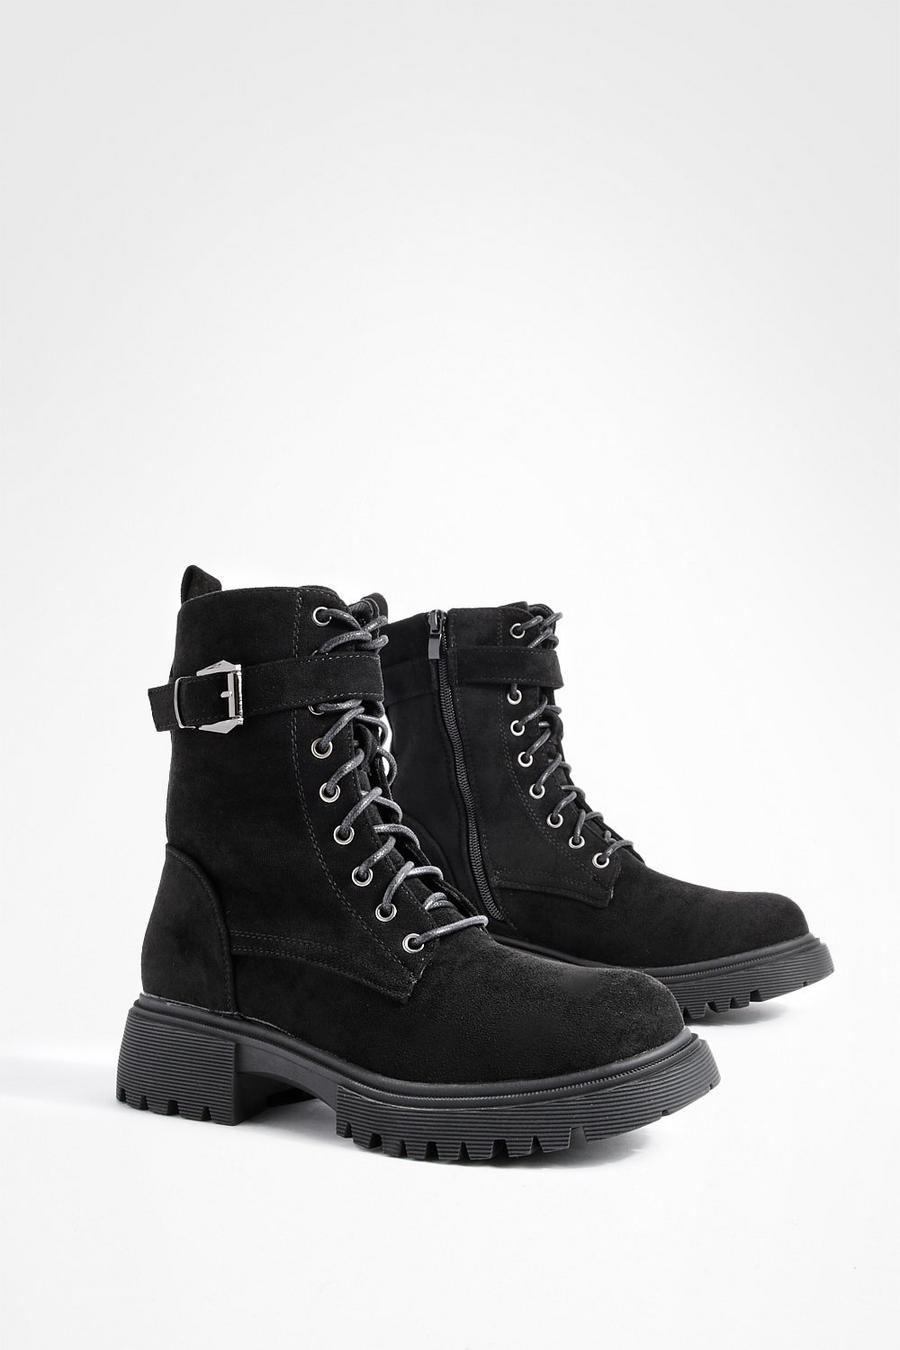 Black Buckle Chunky Hiker Boots image number 1